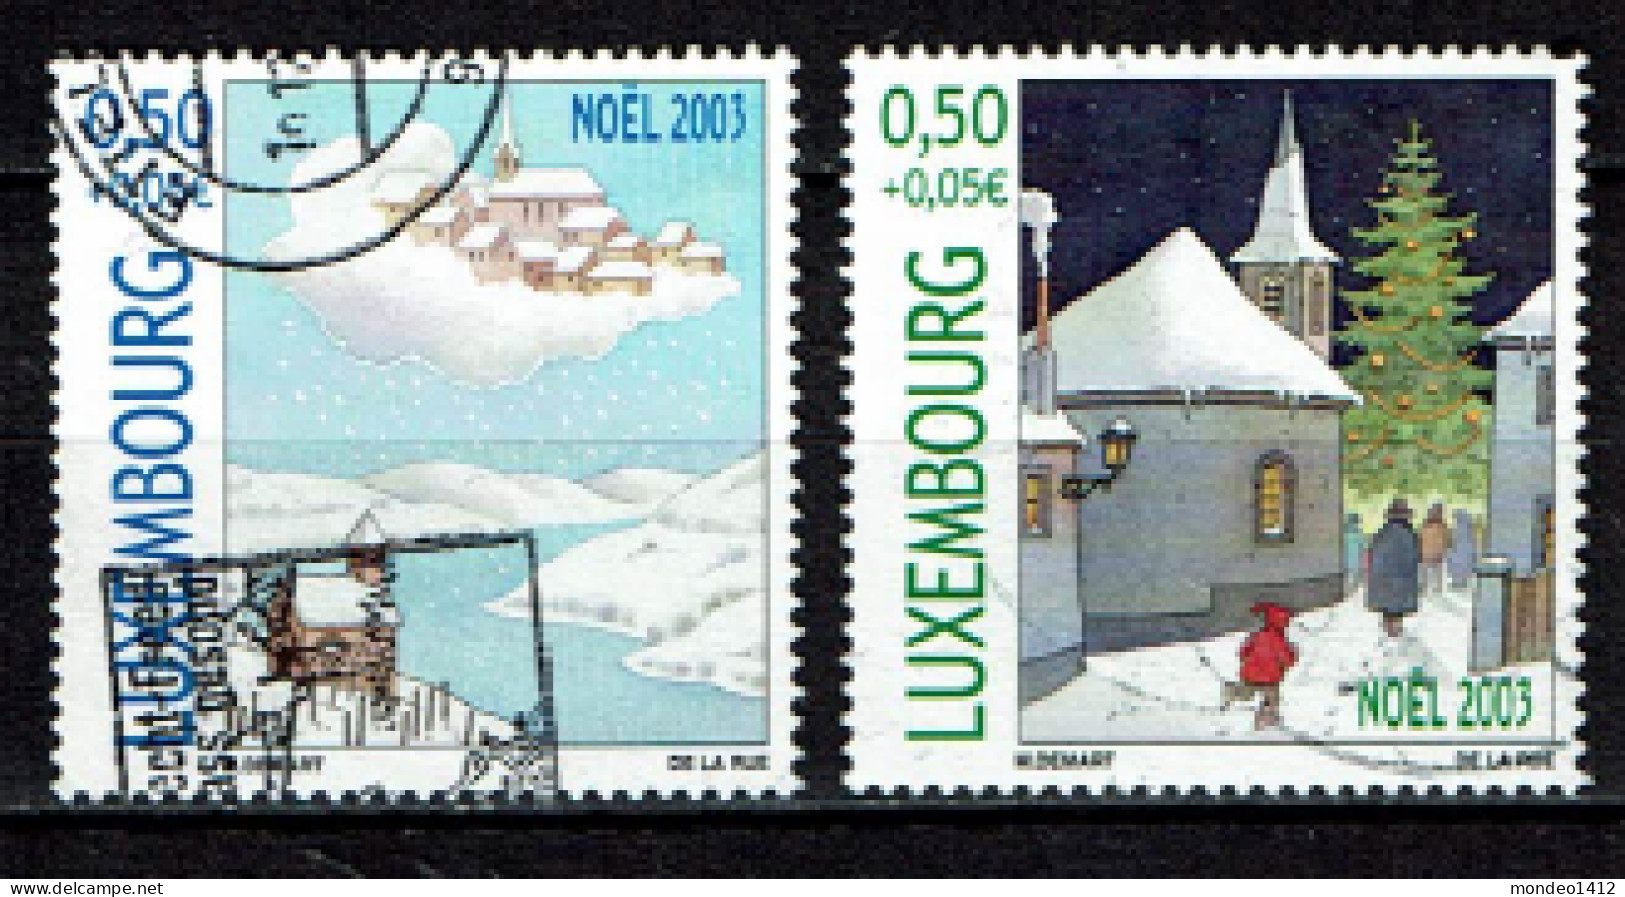 Luxembourg 2003 - YT 1570/1570 - Noël, Eglise, Chapelle, Christmas, Weihnachten - Used Stamps